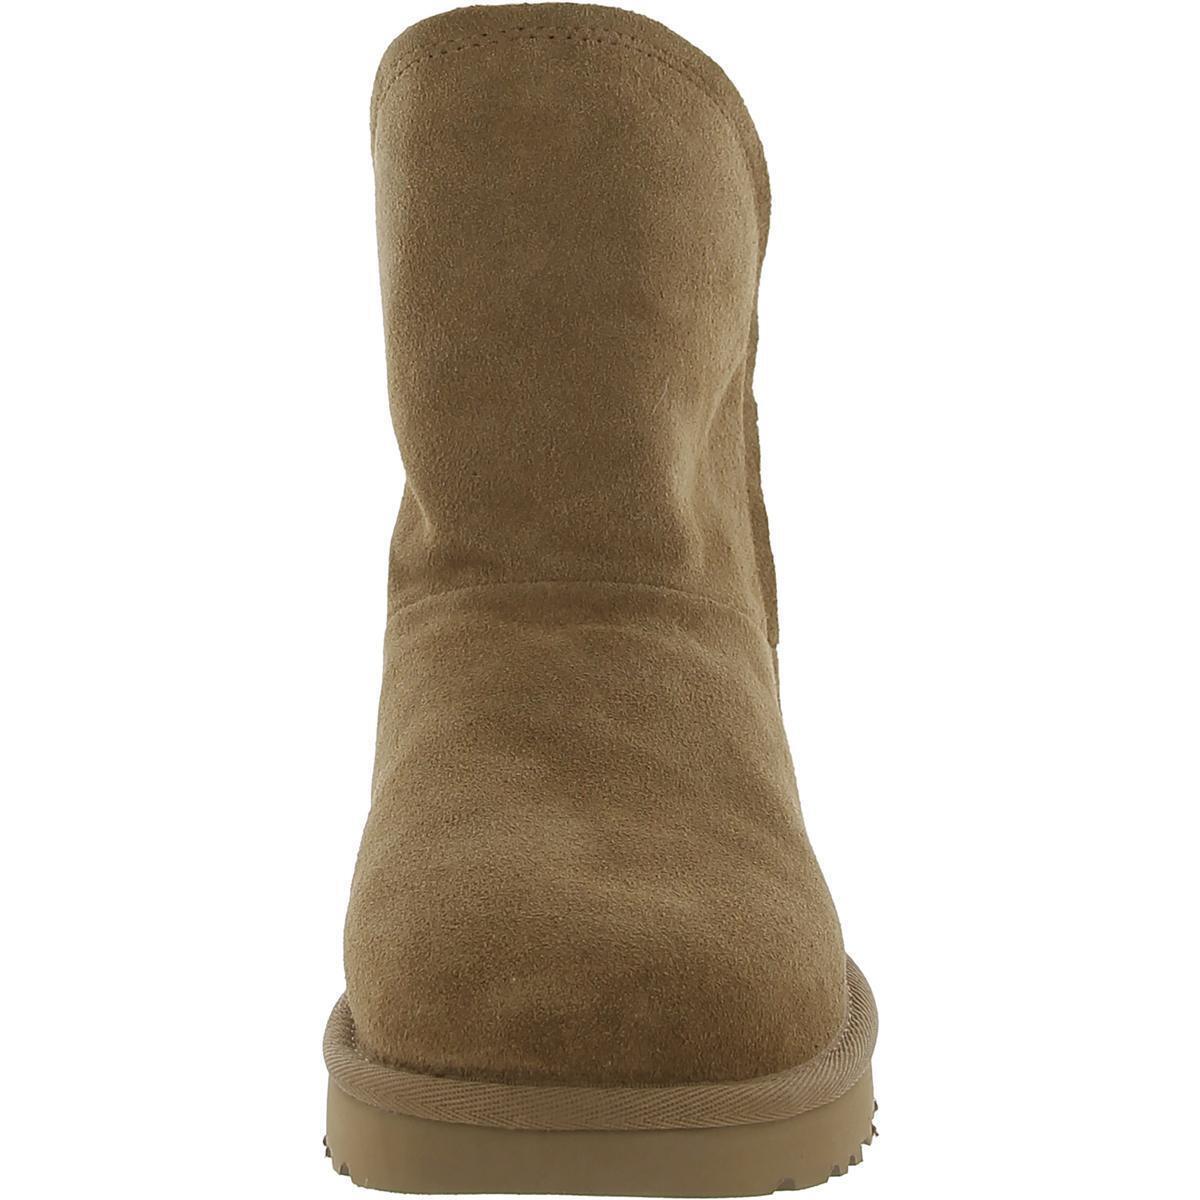 Ugg Womens Suede Wool Blend Cozy Winter Snow Boots Shoes Bhfo 2850